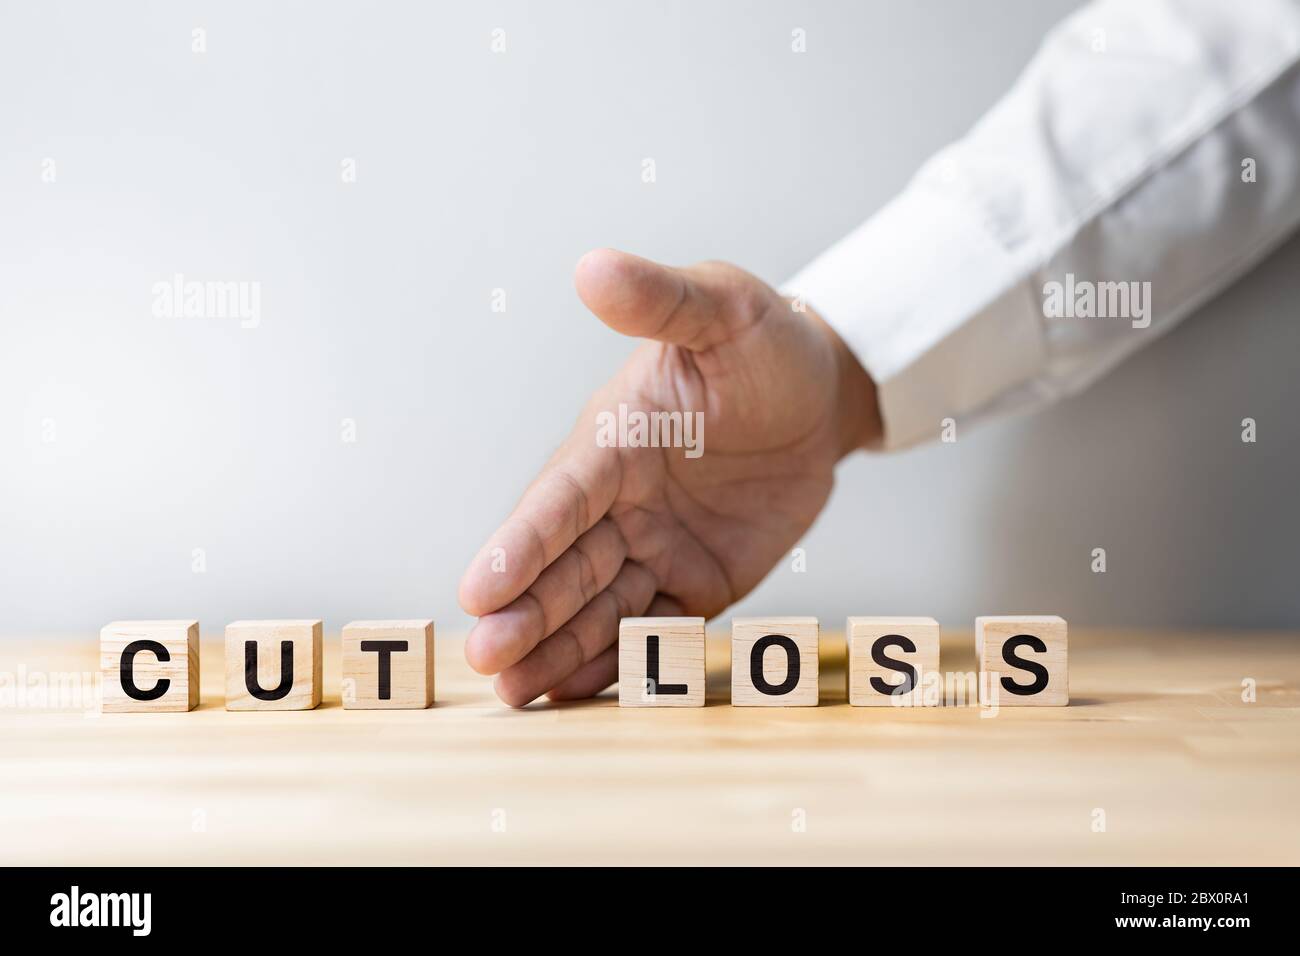 Investment strategic direction concepts with business person cut loss for saving money in stock market.financial management.challenge and change Stock Photo